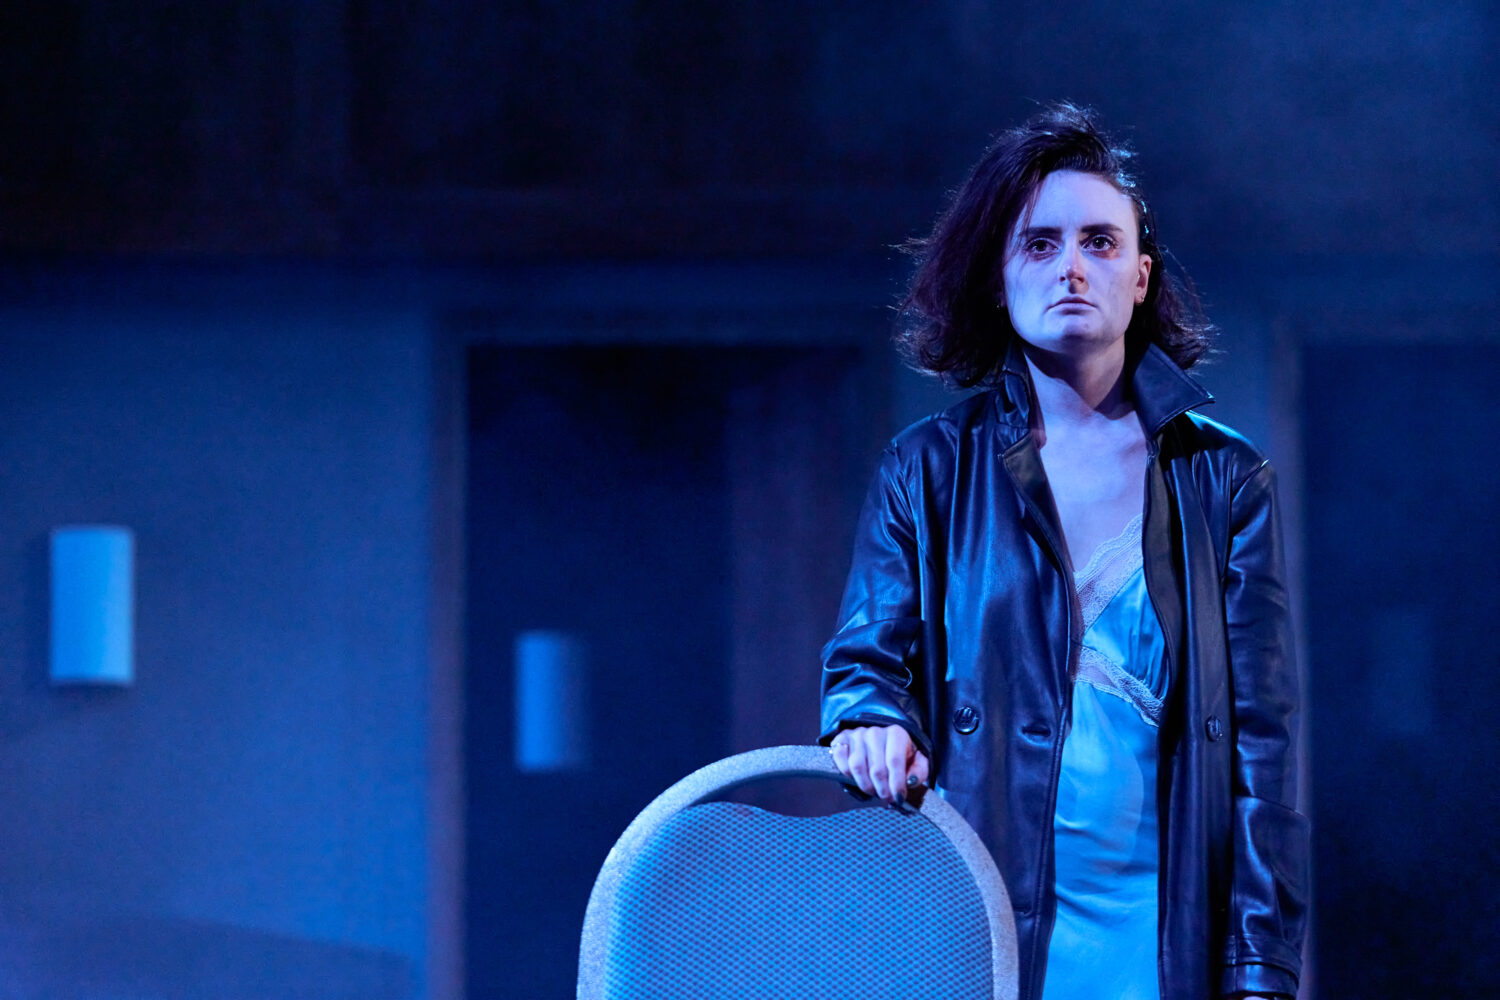 Macbeth at Northern Stage, Laura Elsworthy – The Other Richard